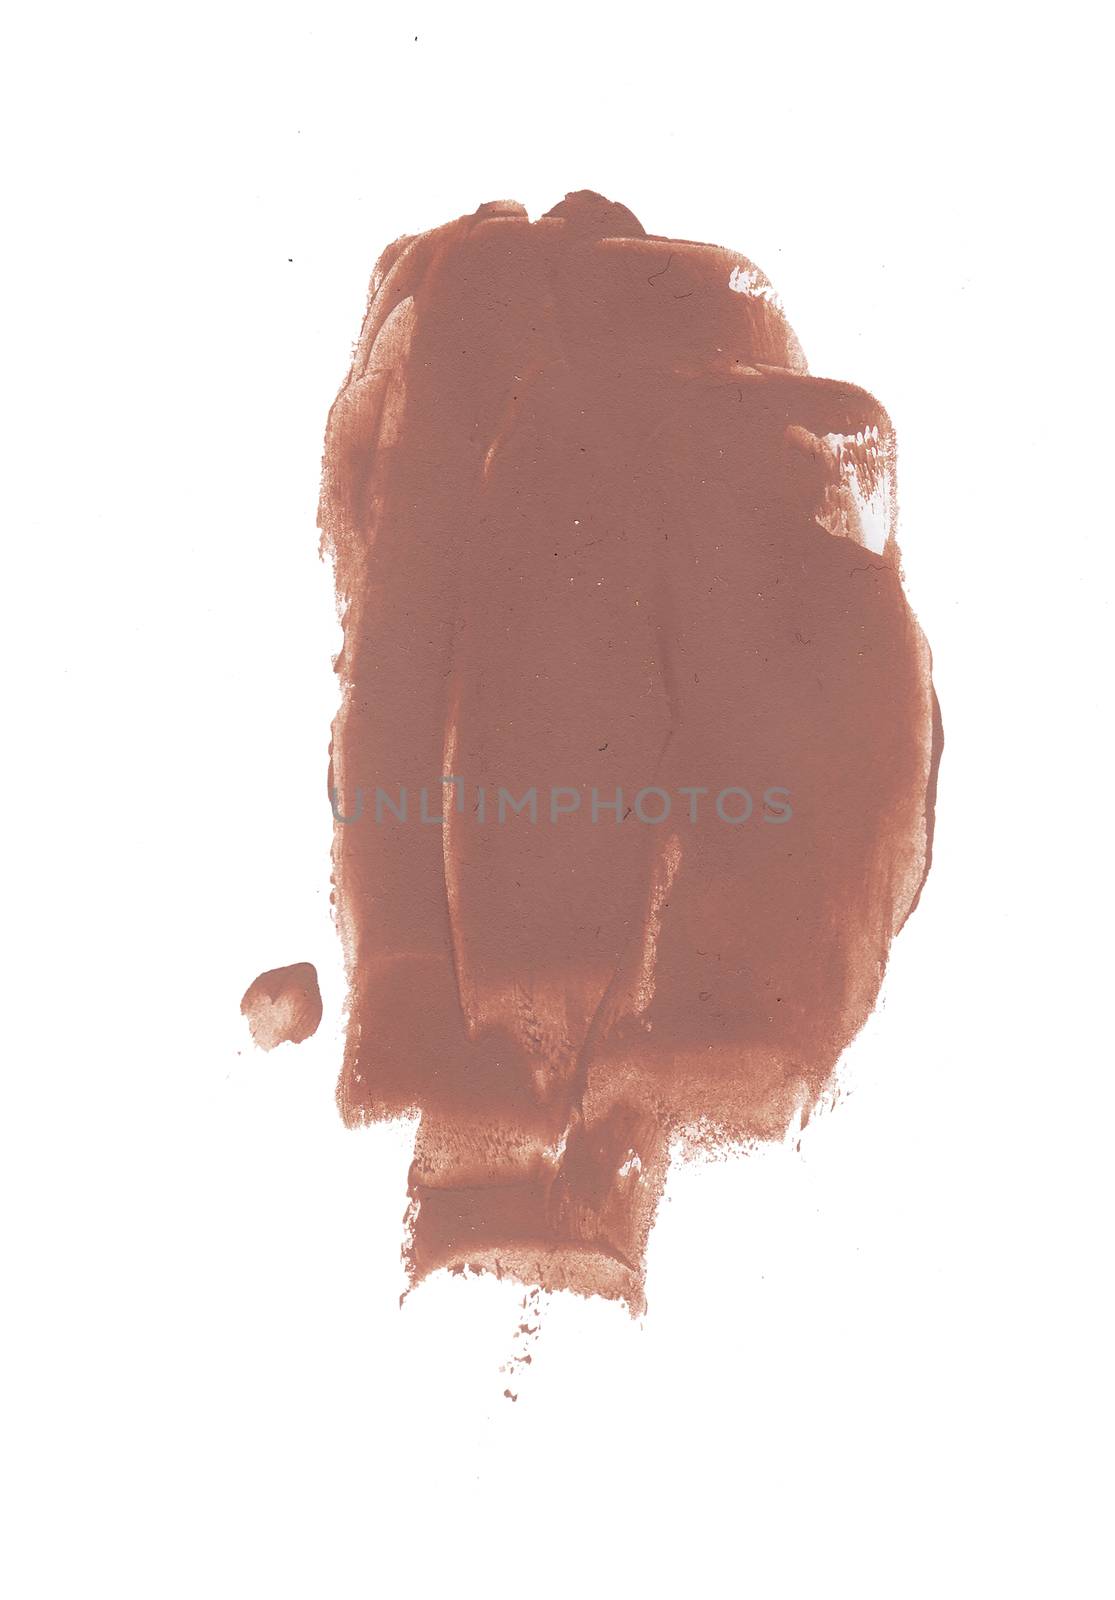 Foundation messy smear isolated on white background. Creamy texture makeup smudge illustration, brush stroke. For card, banner, poster design.